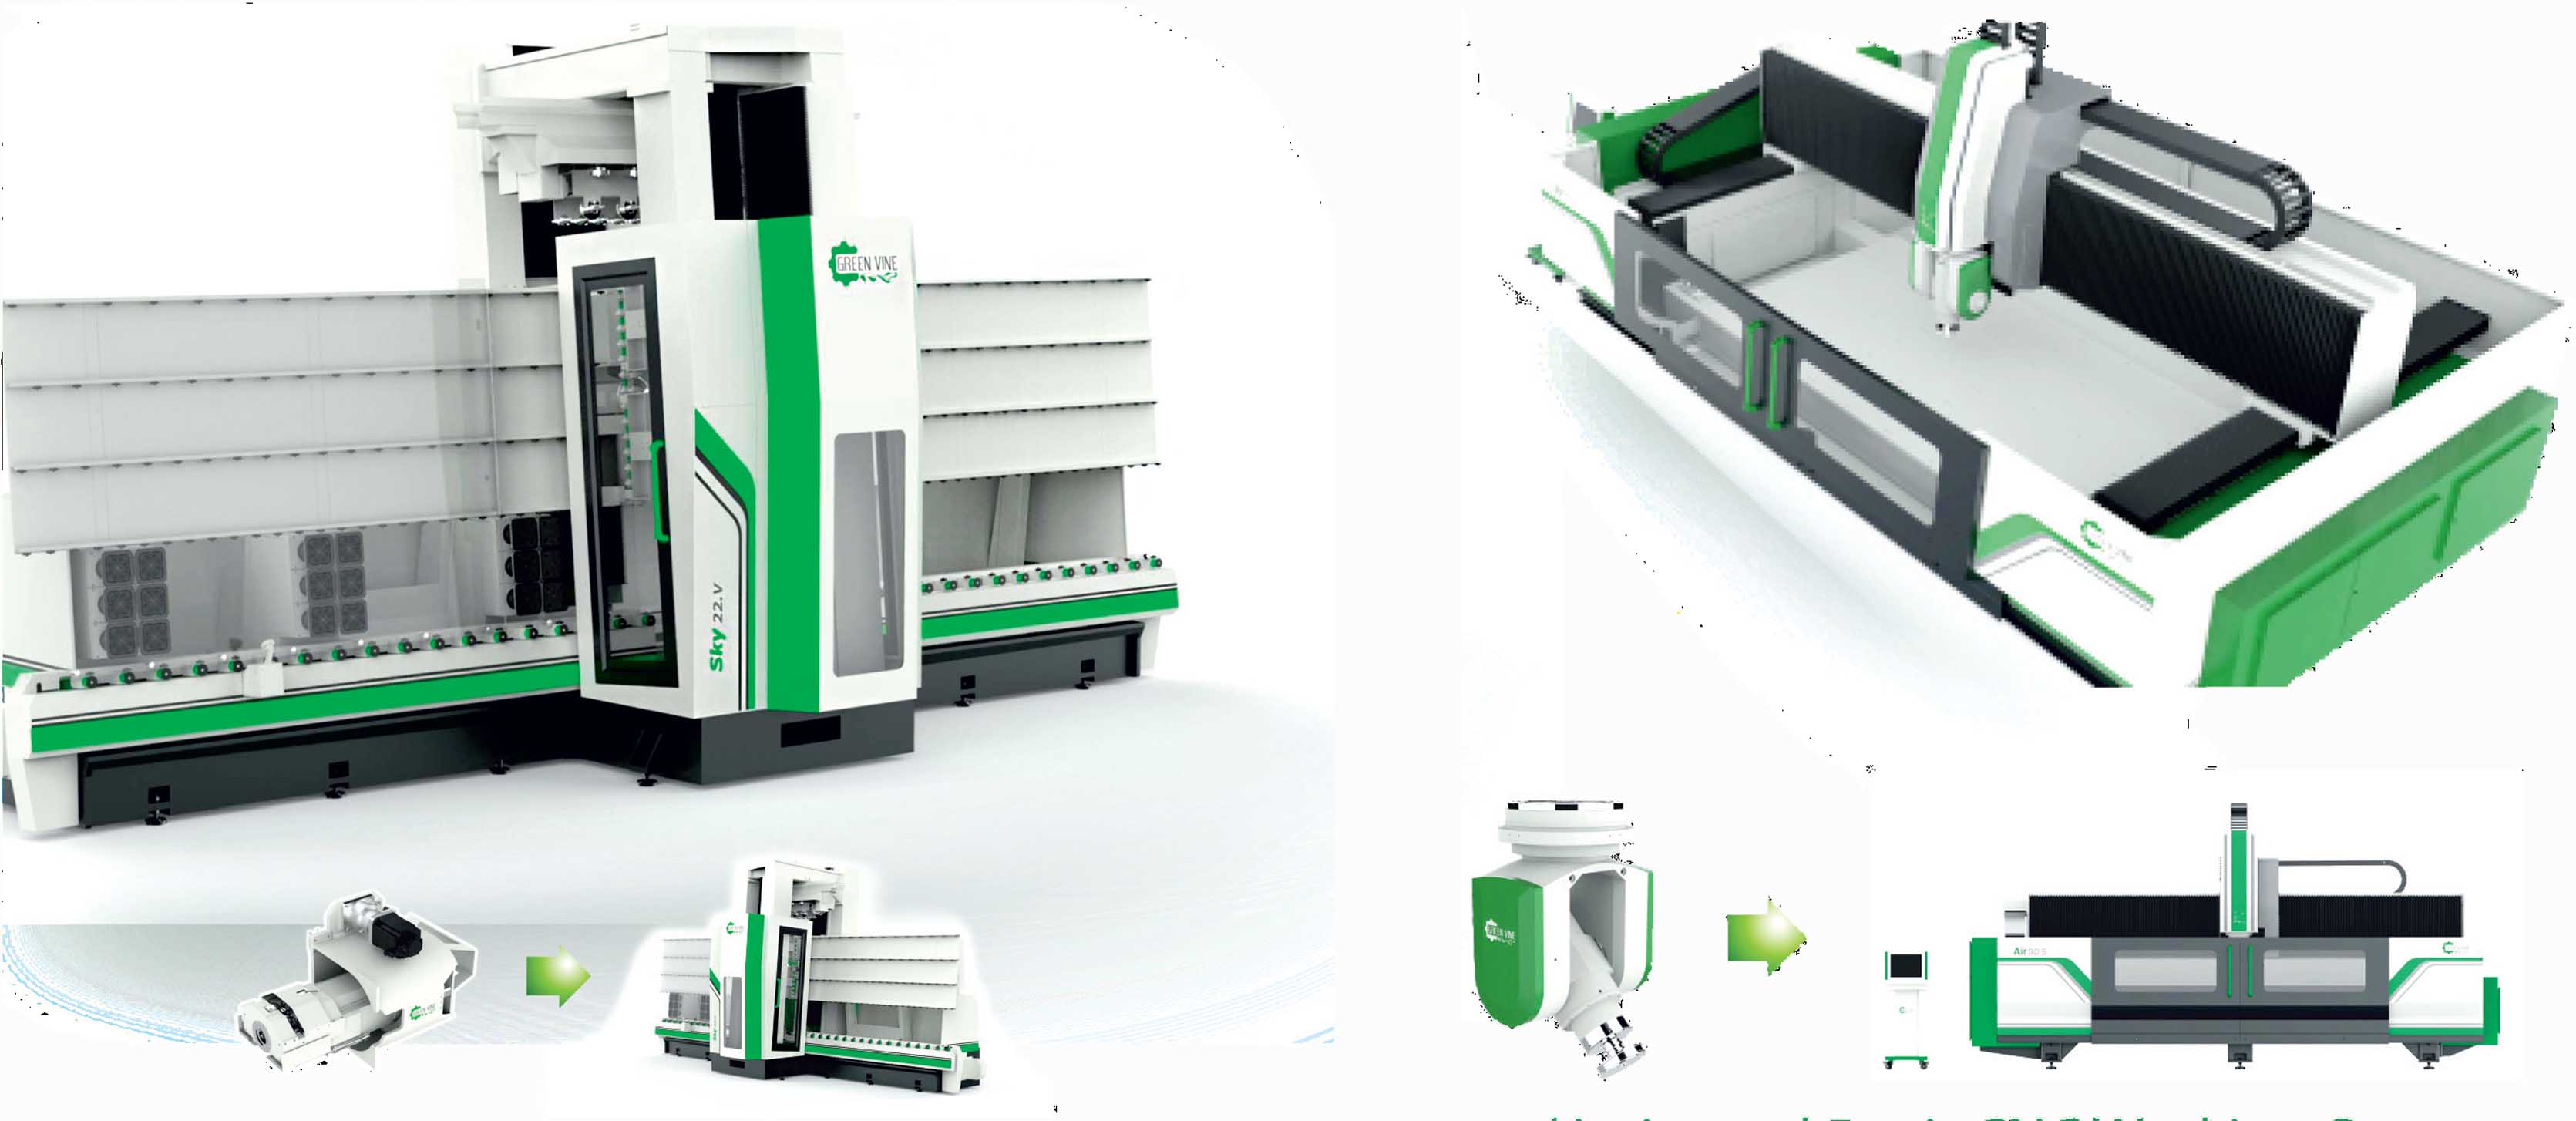 Green Vine produces intelligent glass cold processing machinery